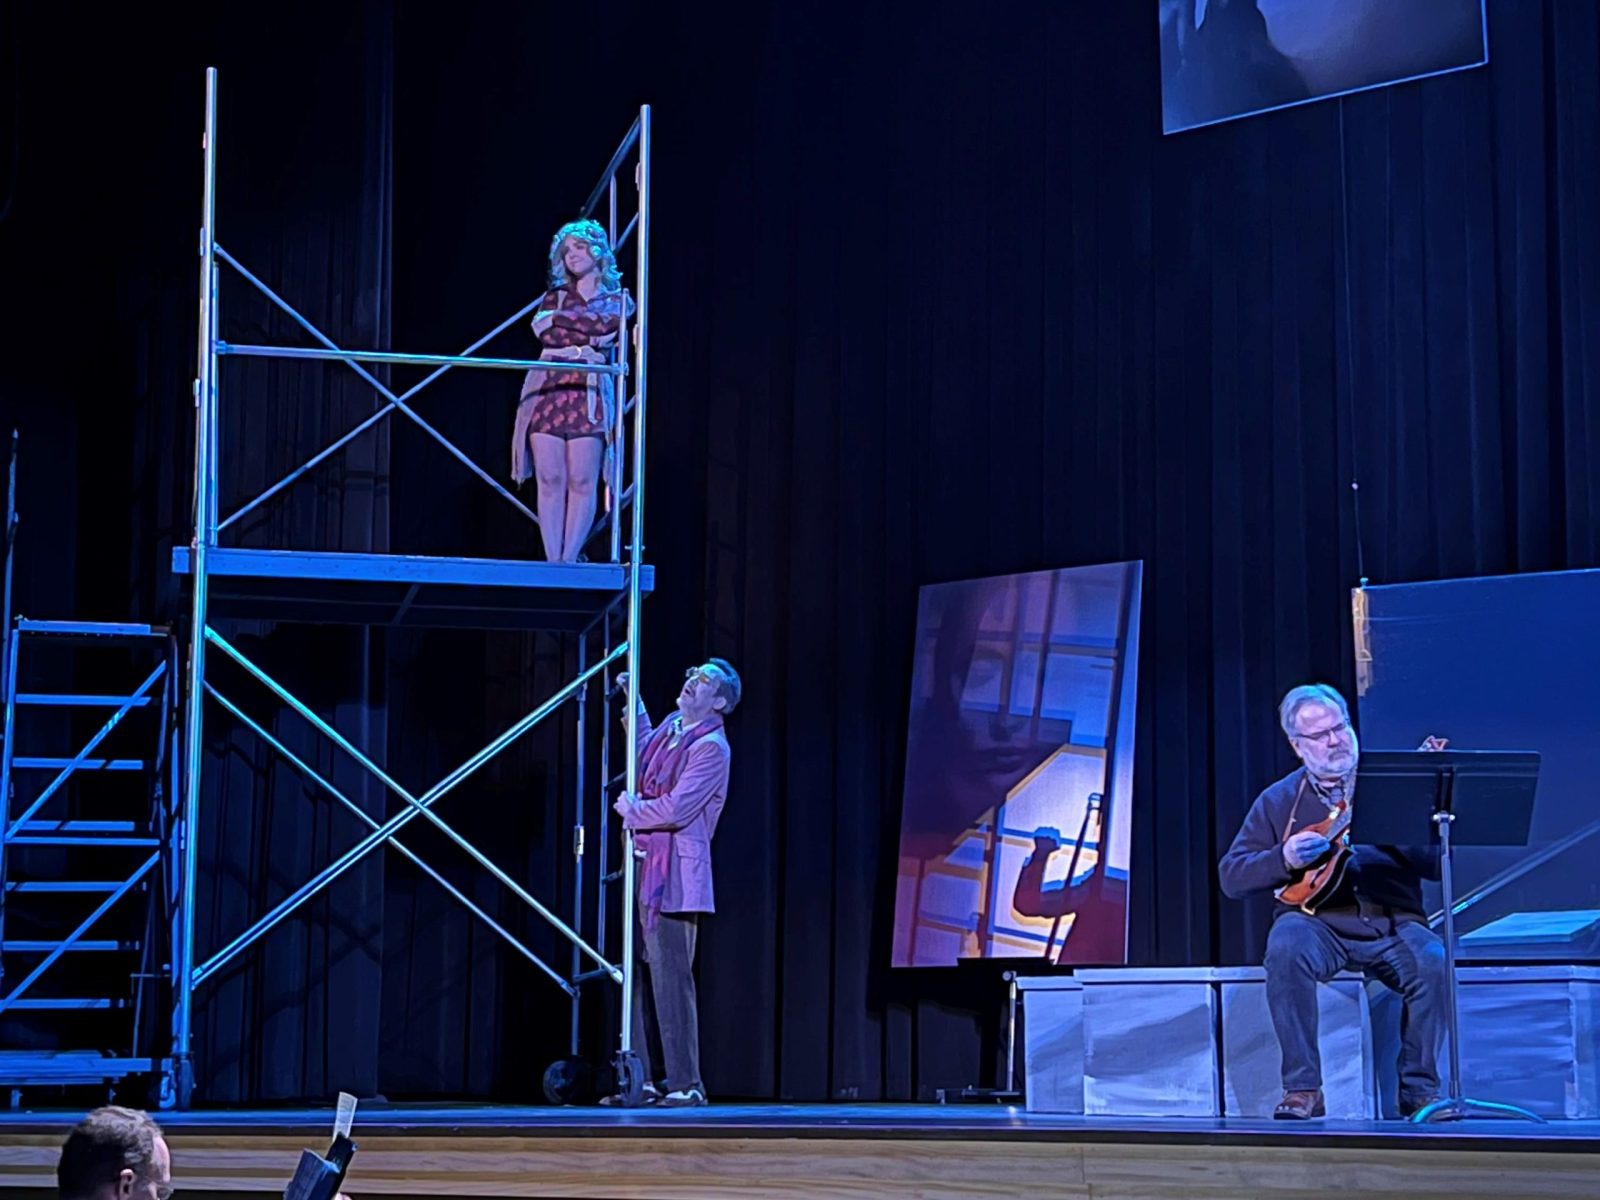 Three actors perform a scene from an opera on a stage